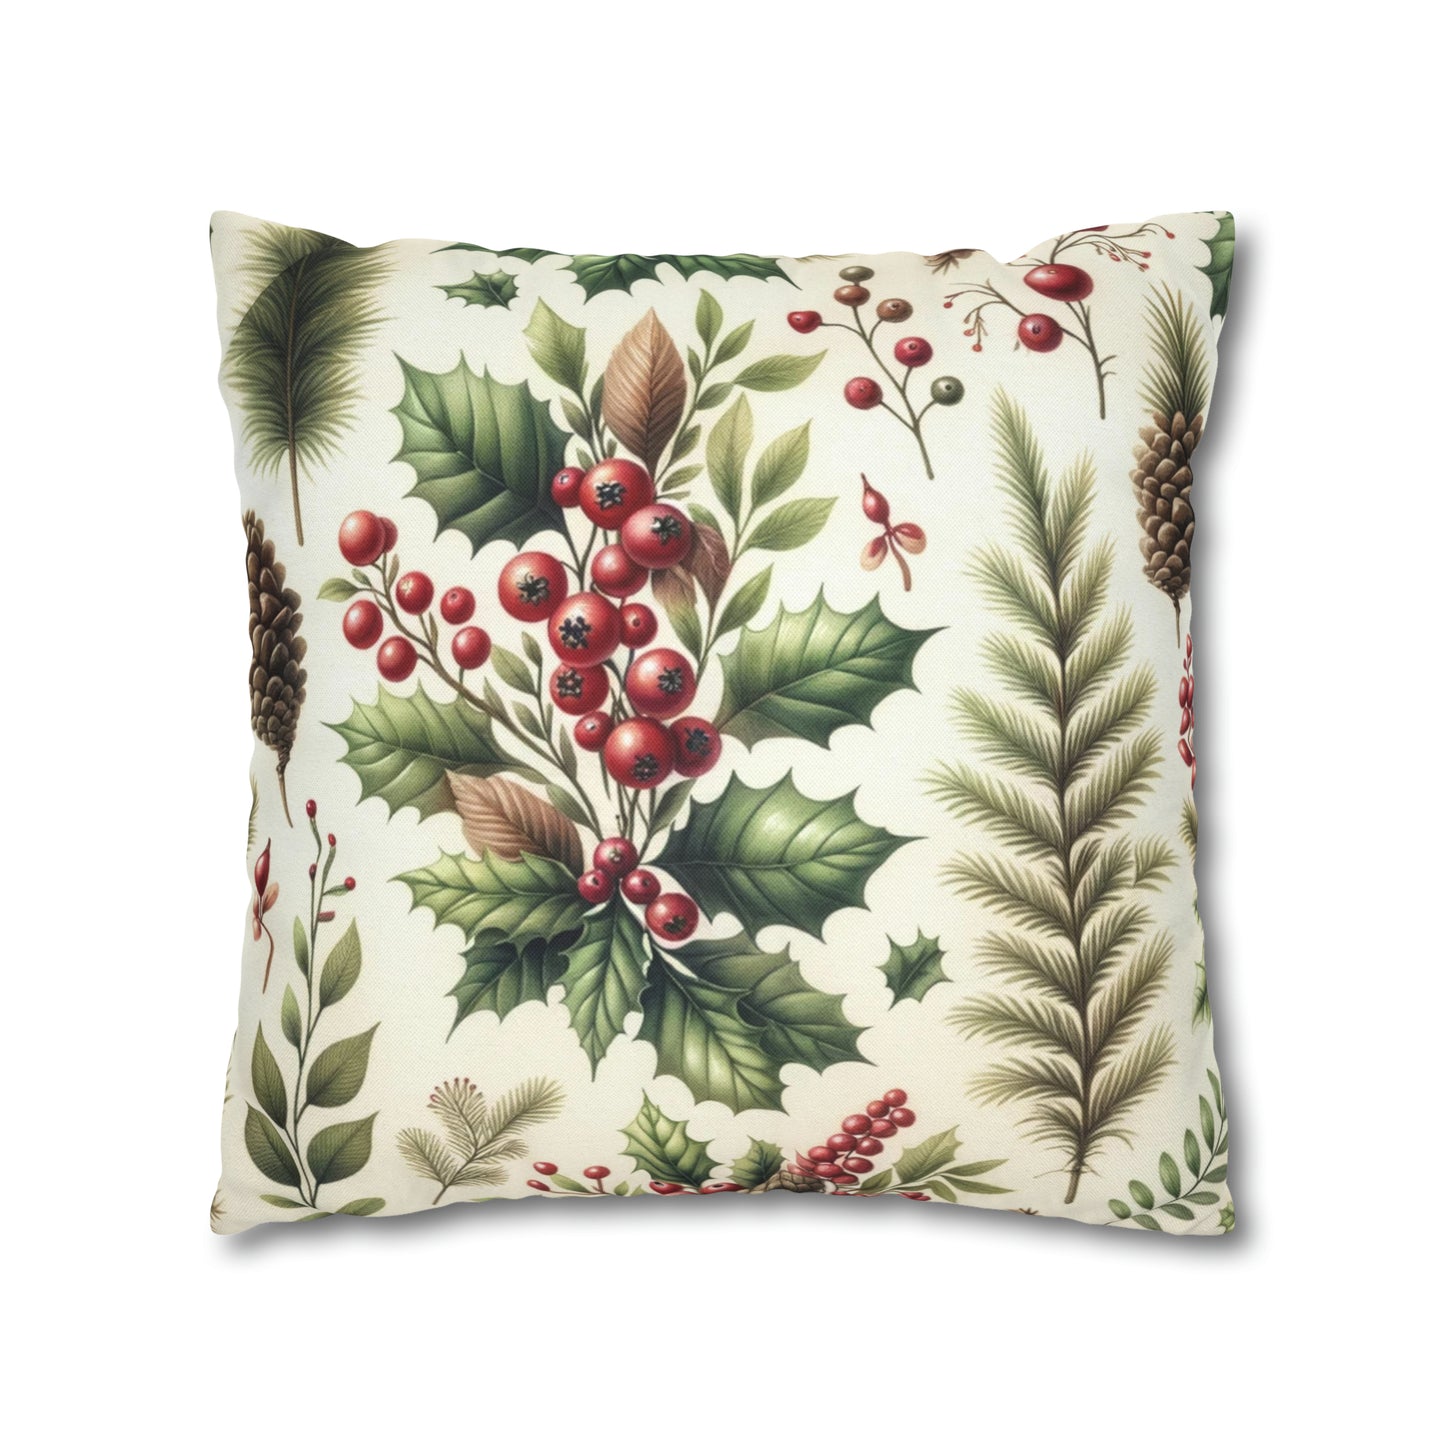 Festive Pine Cone Pillow Cover, Red Berries Botanical Christmas Xmas Watercolor Square Throw Decorative Cover Cushion 20 x 20 Zipper Holiday